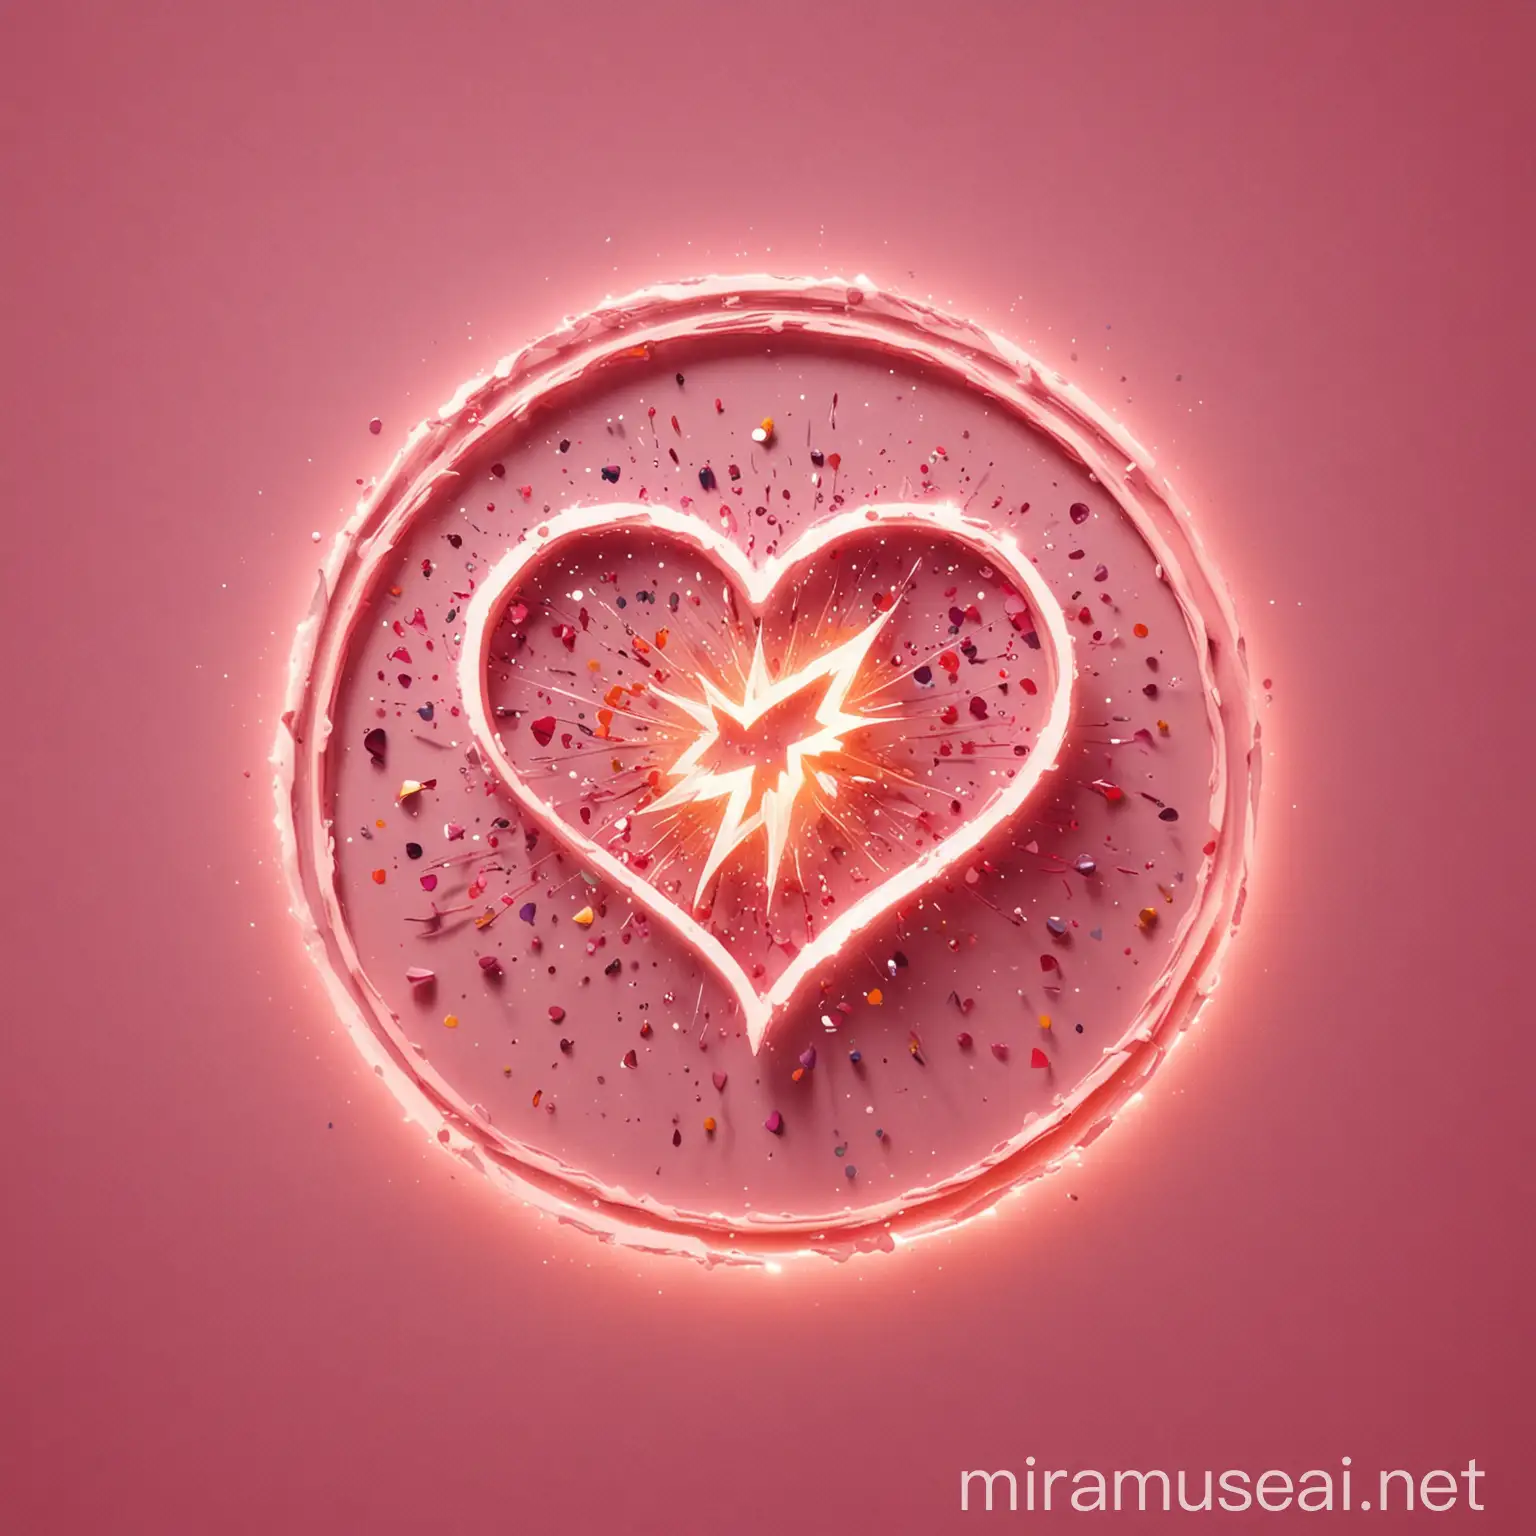 The logo features a stylized, modern design that combines the themes of love, connection, and spark.

The main element is a pair of interconnected hearts, with each heart forming the shape of a spark or a flame. The hearts are designed to be symmetrical, with the top and bottom curves mirroring each other.
The sparks/flames are stylized to resemble a lightning bolt, symbolizing the excitement and energy of a new connection.
The hearts are surrounded by a circle, which represents unity, wholeness, and infinity.
The circle is broken up into small, subtle sparks or dots, giving the logo a sense of movement and dynamism.
The color scheme is a bold and vibrant combination of pink and orange, evoking feelings of passion, energy, and playfulness.